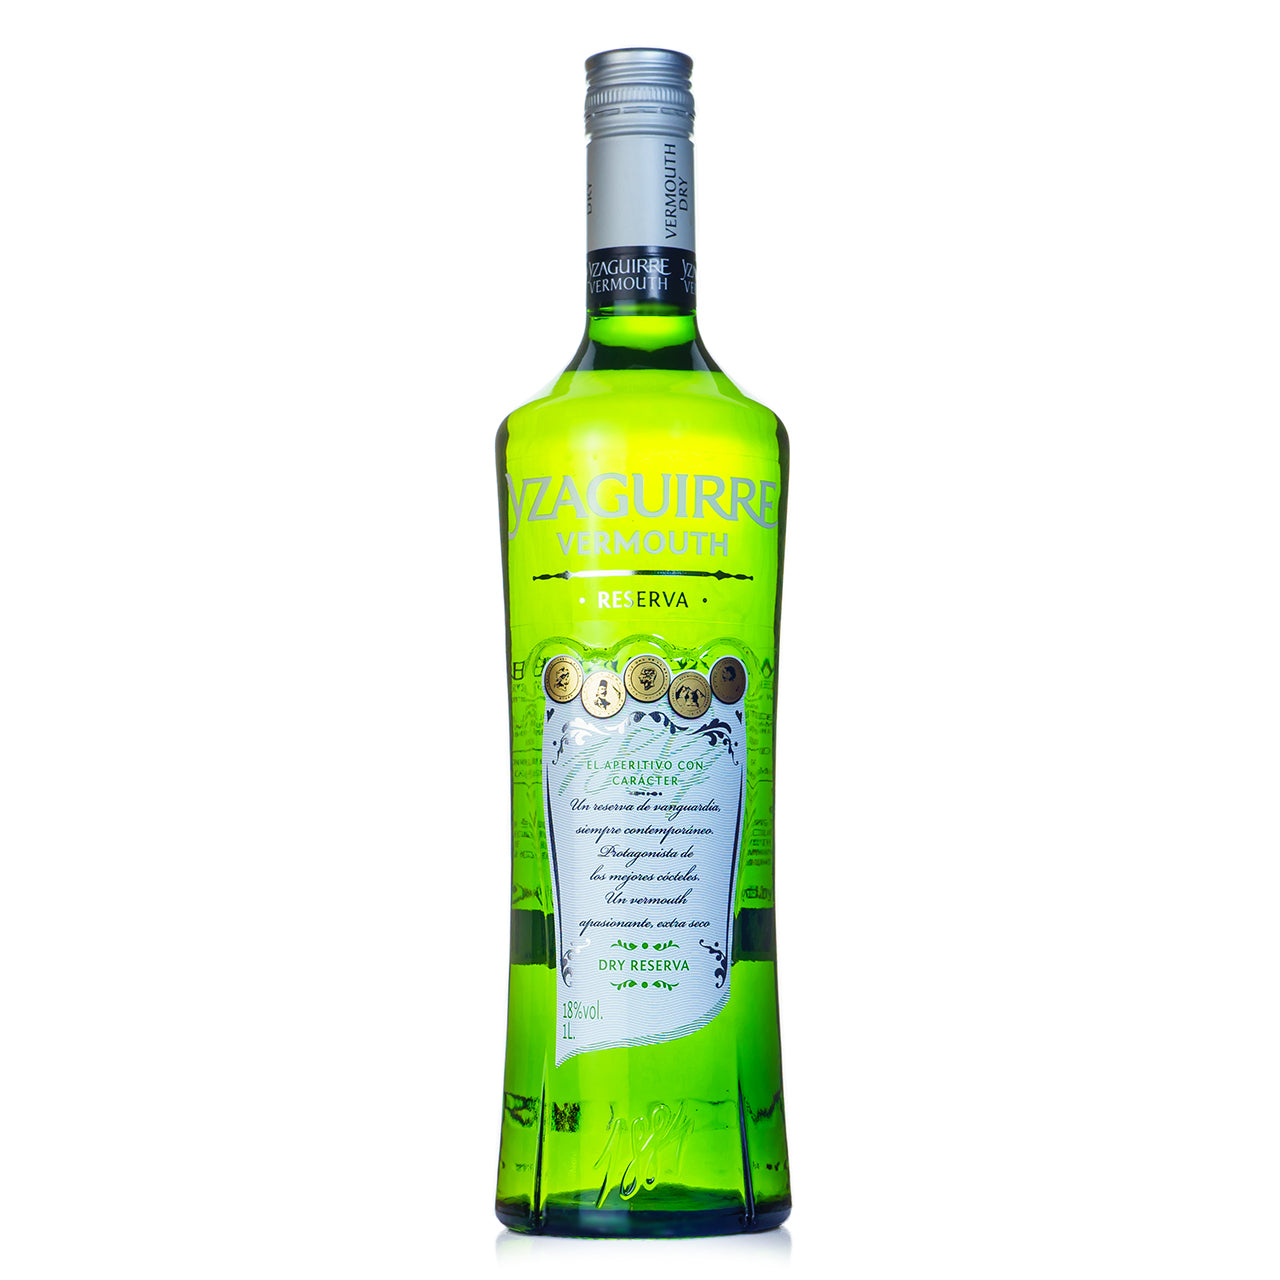 Yzaguirre Dry Reserva Vermouth